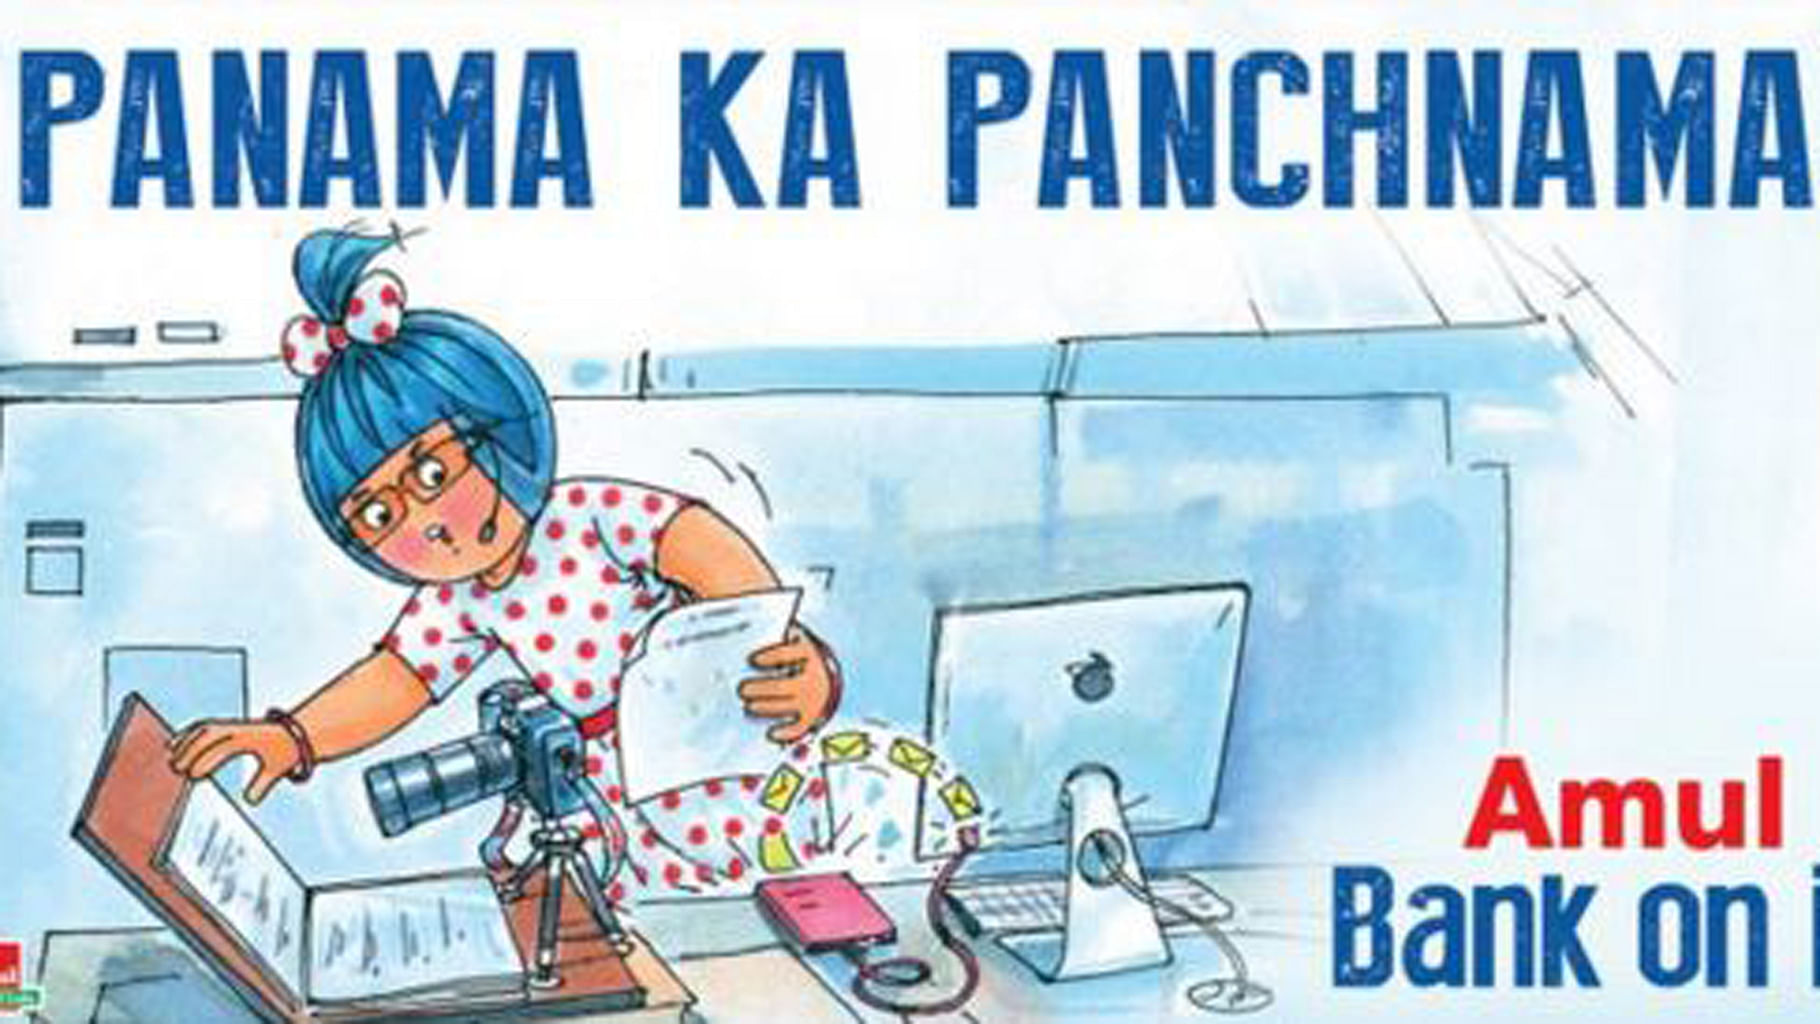 Amul India takes a dig at the Panama papers leak. (Photo Courtesy: Twitter/<a href="https://twitter.com/Amul_Coop/status/717692482528485376">@Amul_Coop</a>)